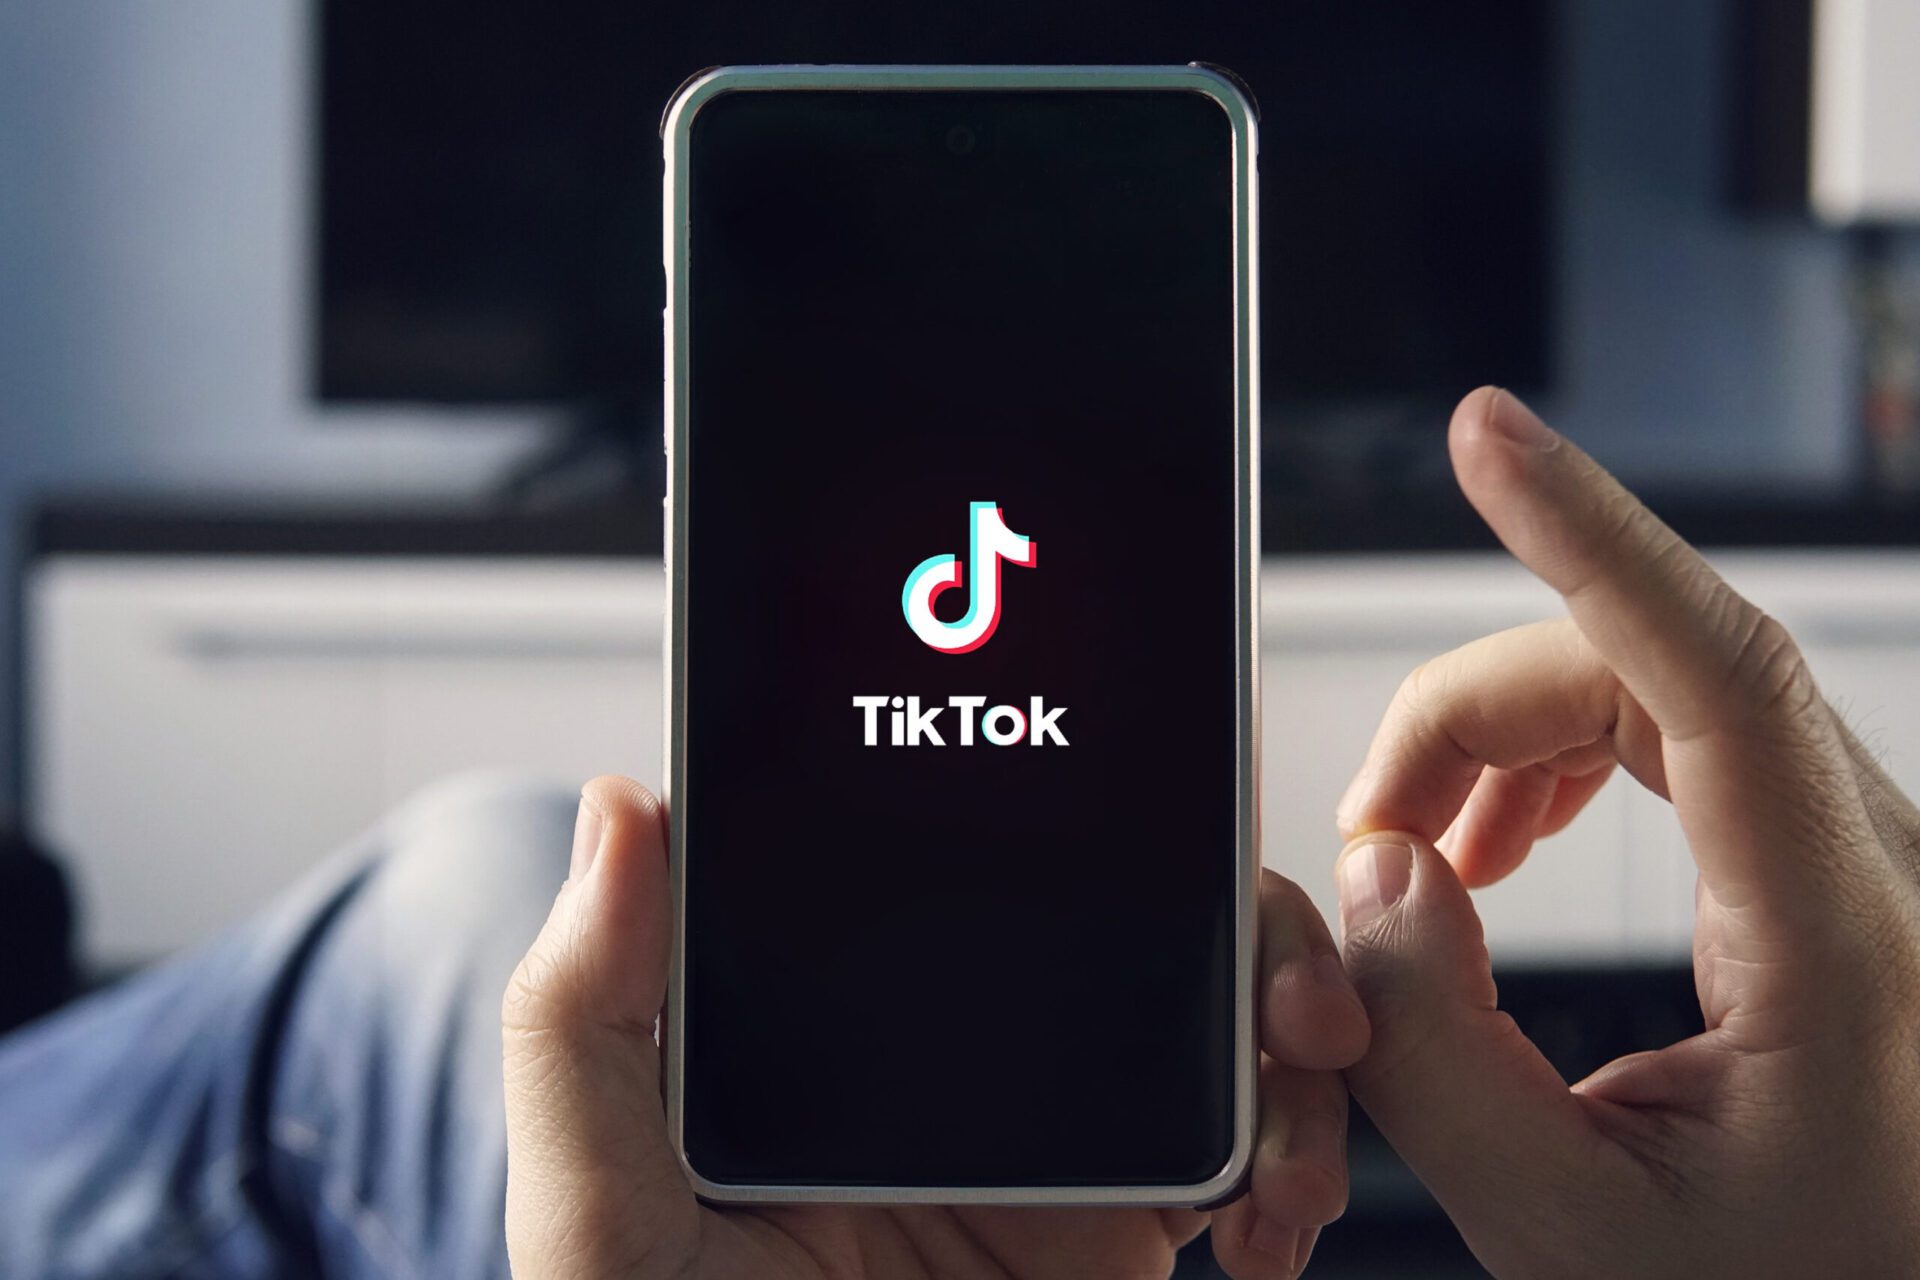 Should We Worry About TikTok Being on Company Devices?